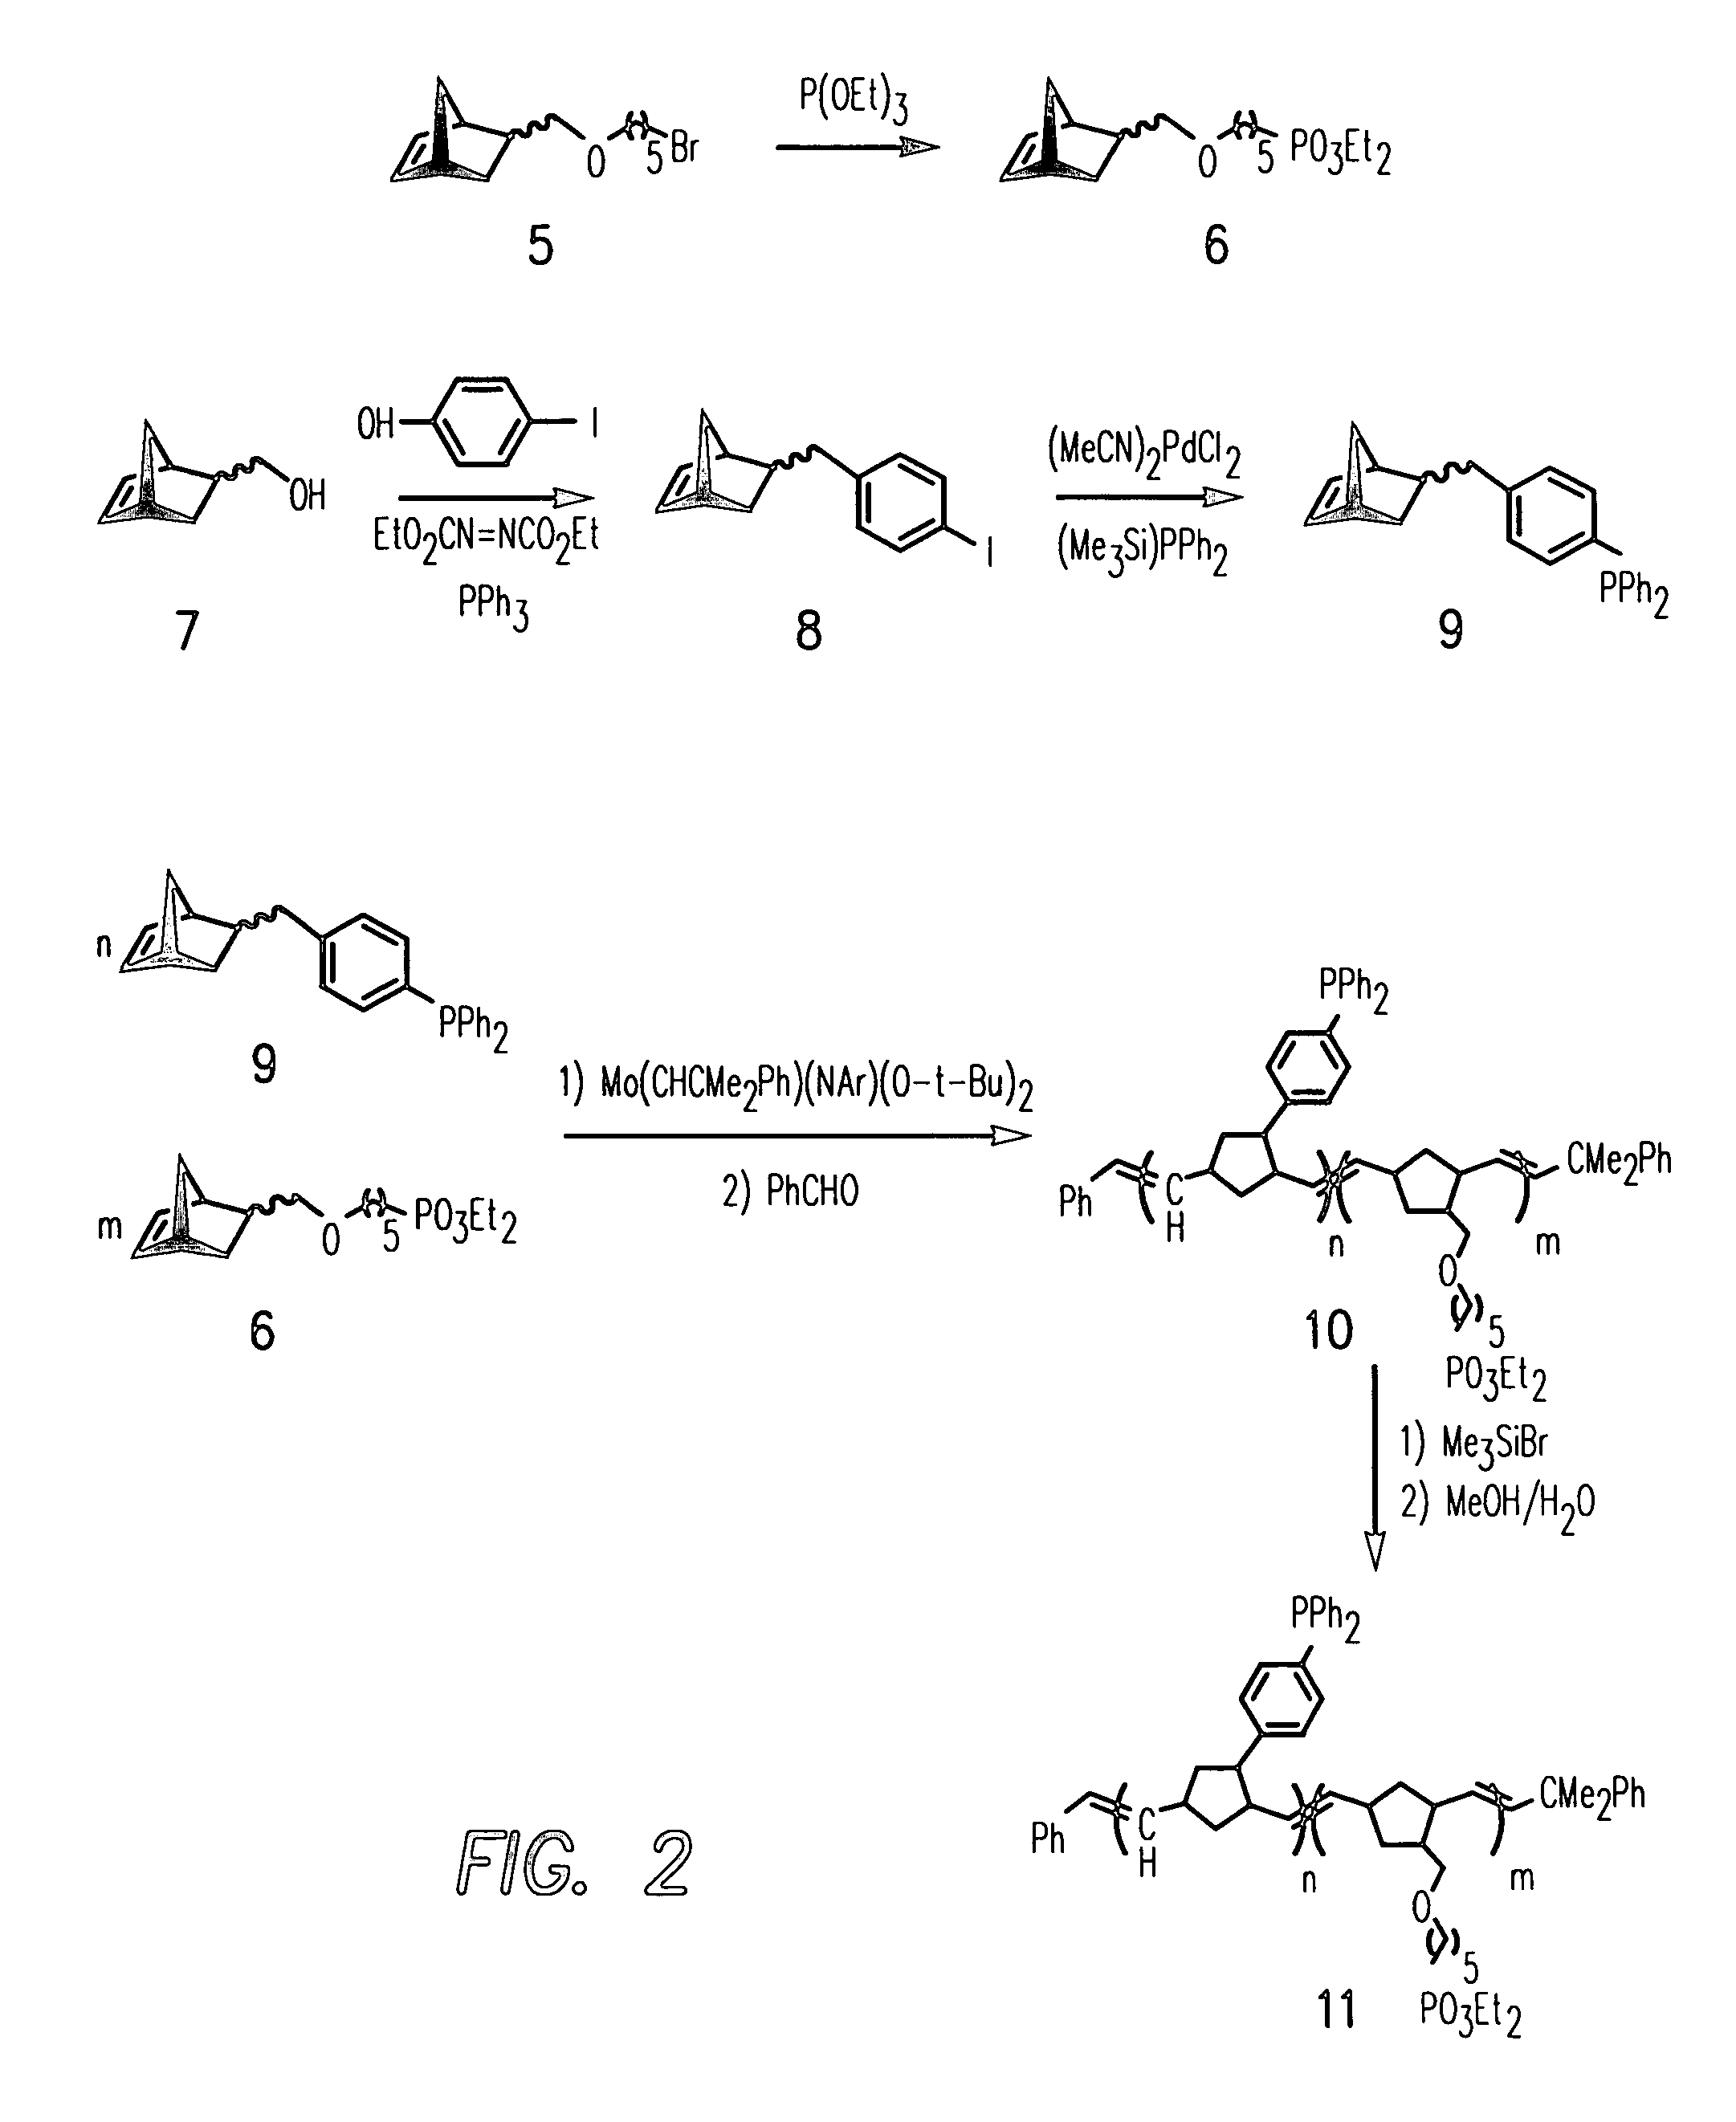 Materials and methods for immobilization of catalysts on surfaces and for selective electroless metallization